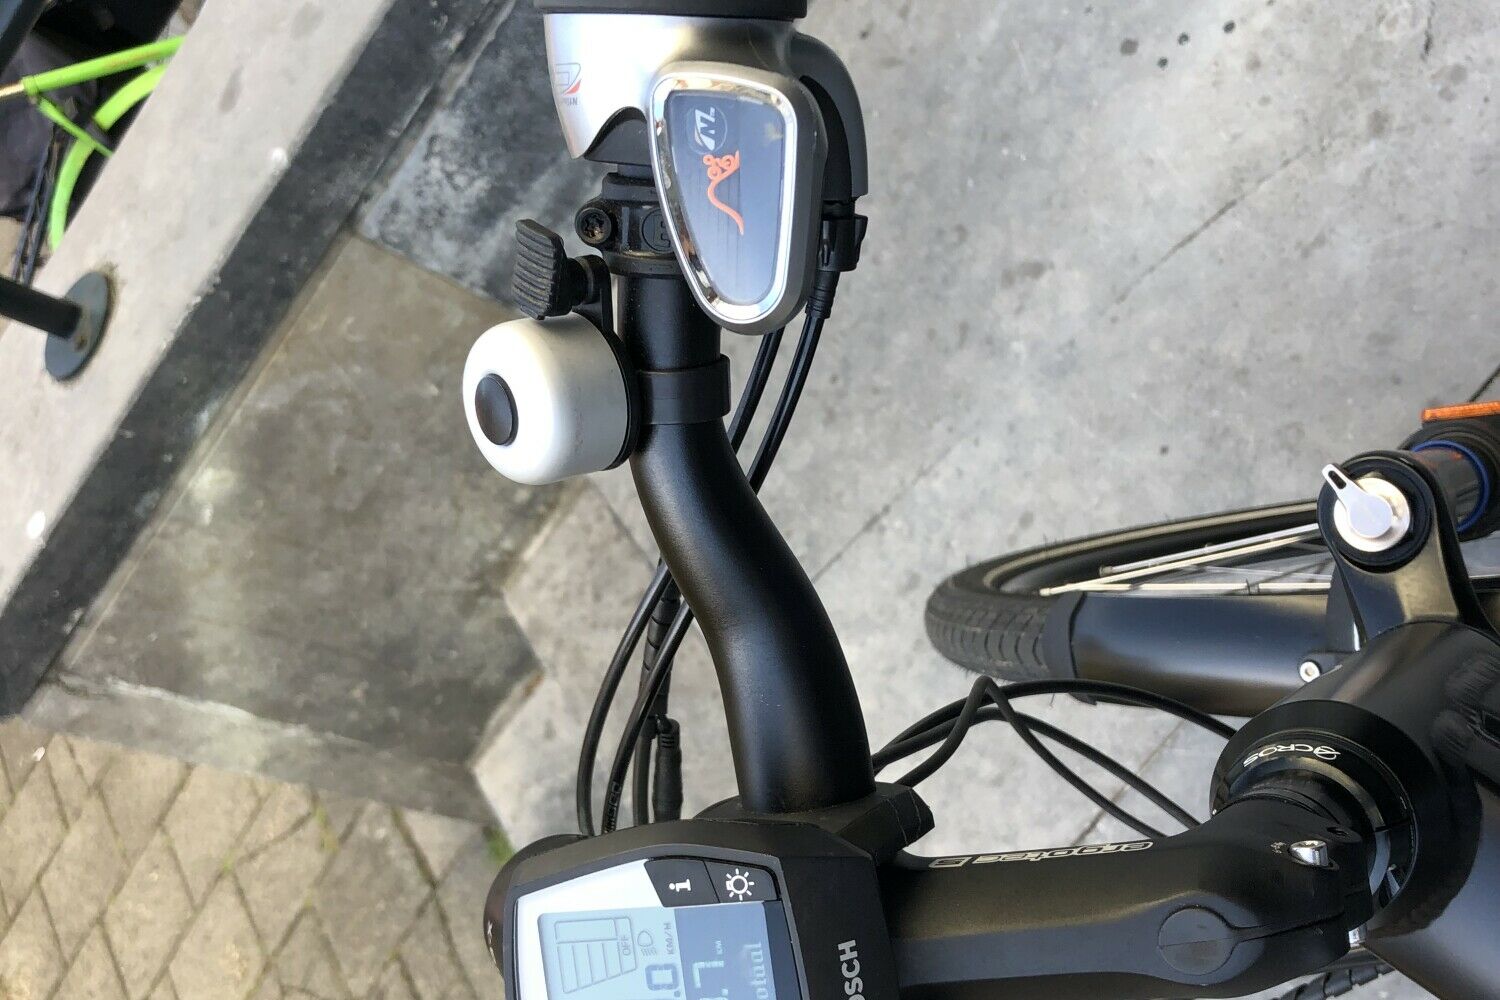 Riese & Müller New Charger HS/45 km